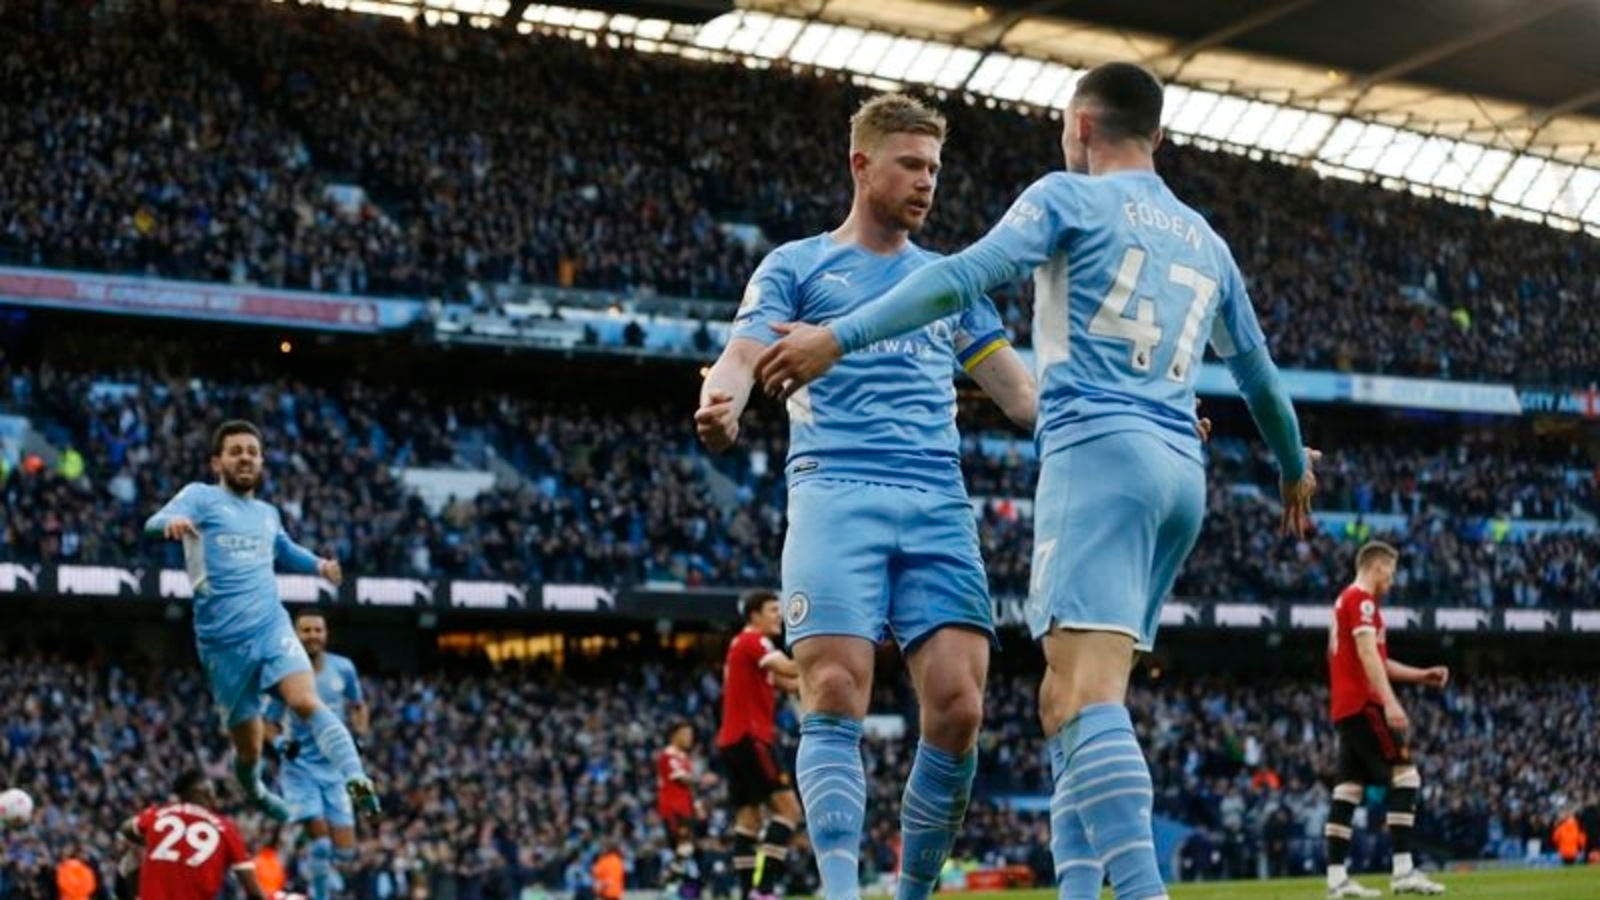 De Bruyne and Mahrez fire Manchester City to 4-1 win over United; Arsenal pile misery on Watford with 3-2 win